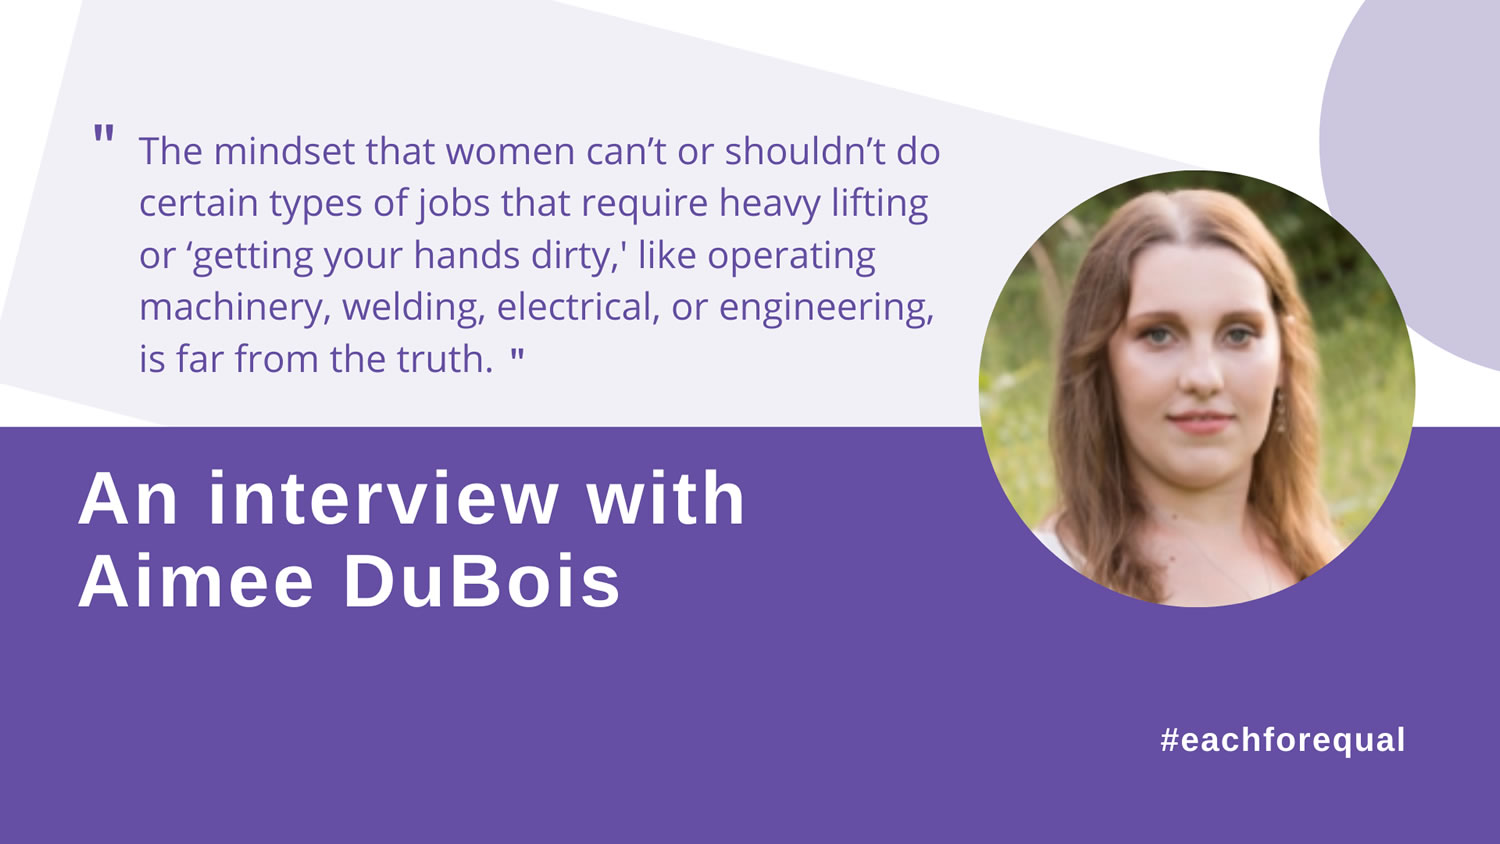 Interview with Bloom Energy’s Aimee DuBois in celebration of International Women’s Day 